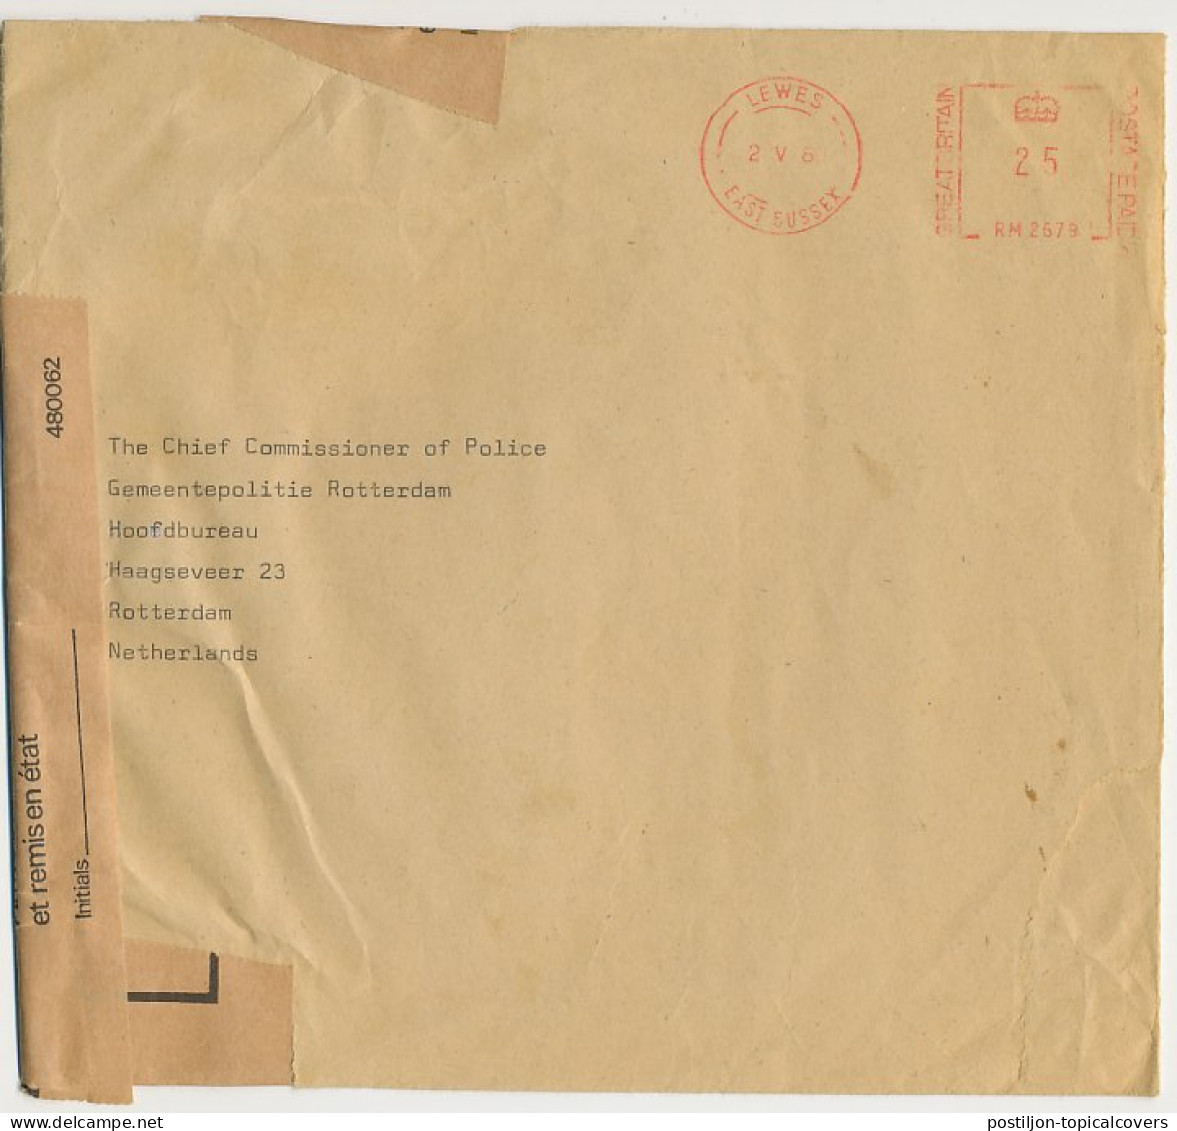 Damaged Mail Cover GB / UK - Netherlands 1980 Found Damaged - Officially Secured - Label / Tape - Sin Clasificación